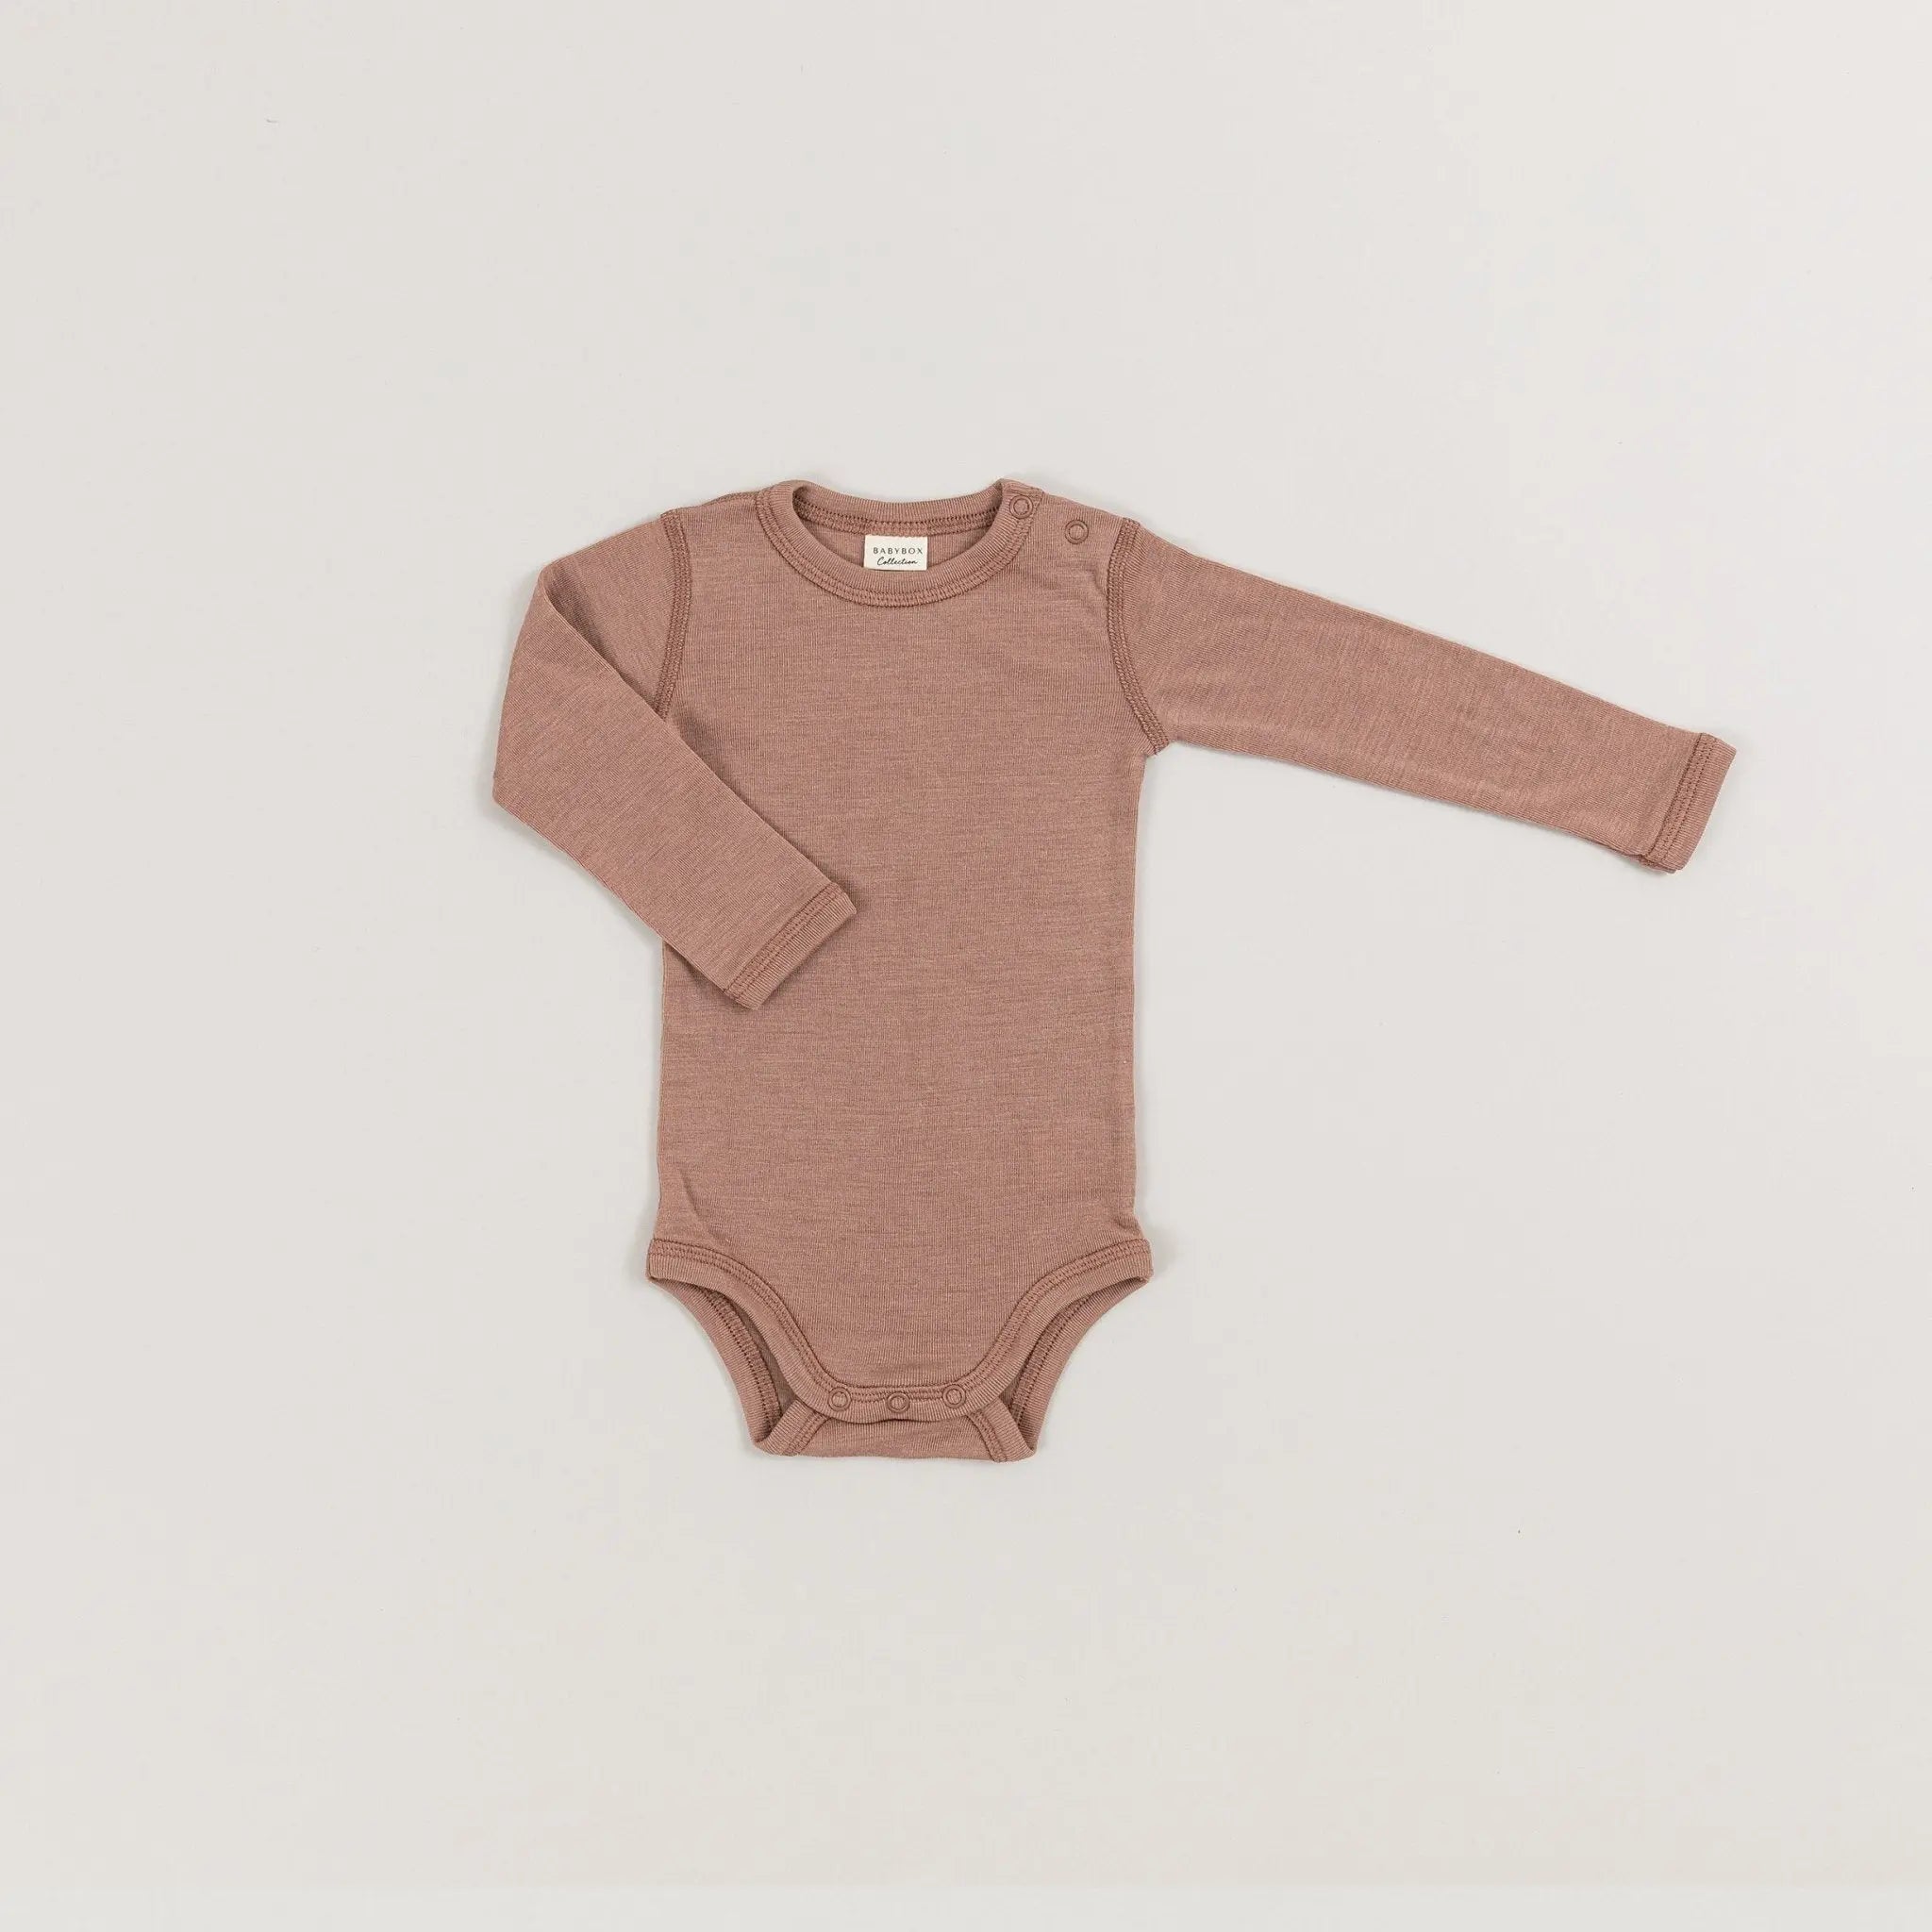 Babybox and Family BabyBox Collection Body aus Wolle & Seide 68/74 rose-fawn-bbcws #farbe_68/74